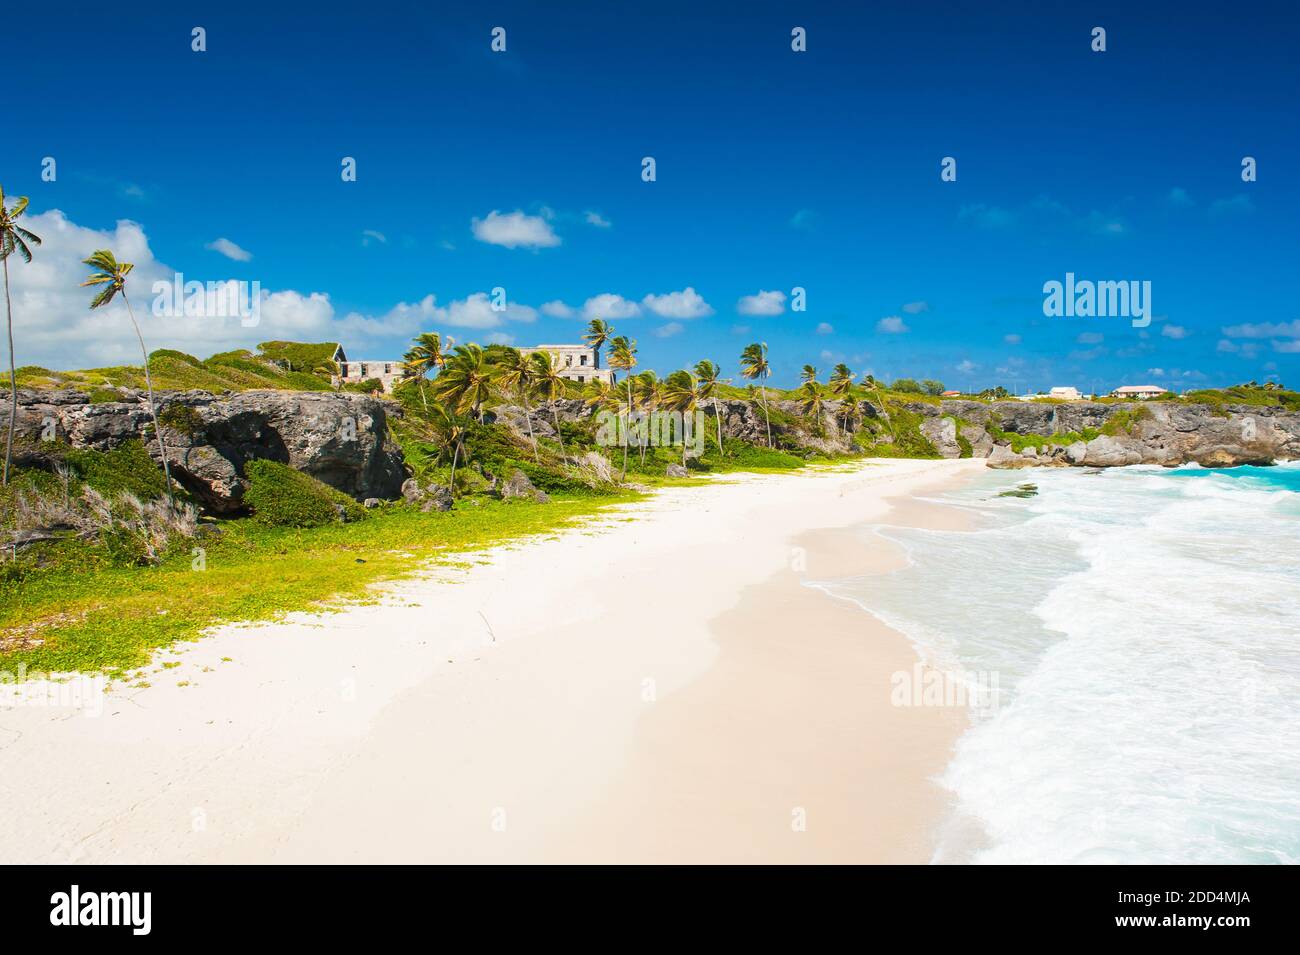 Harrismith Beach is one of the most beautiful beaches on the Caribbean island of Barbados. It is a tropical paradise with palms hanging over turquoise Stock Photo